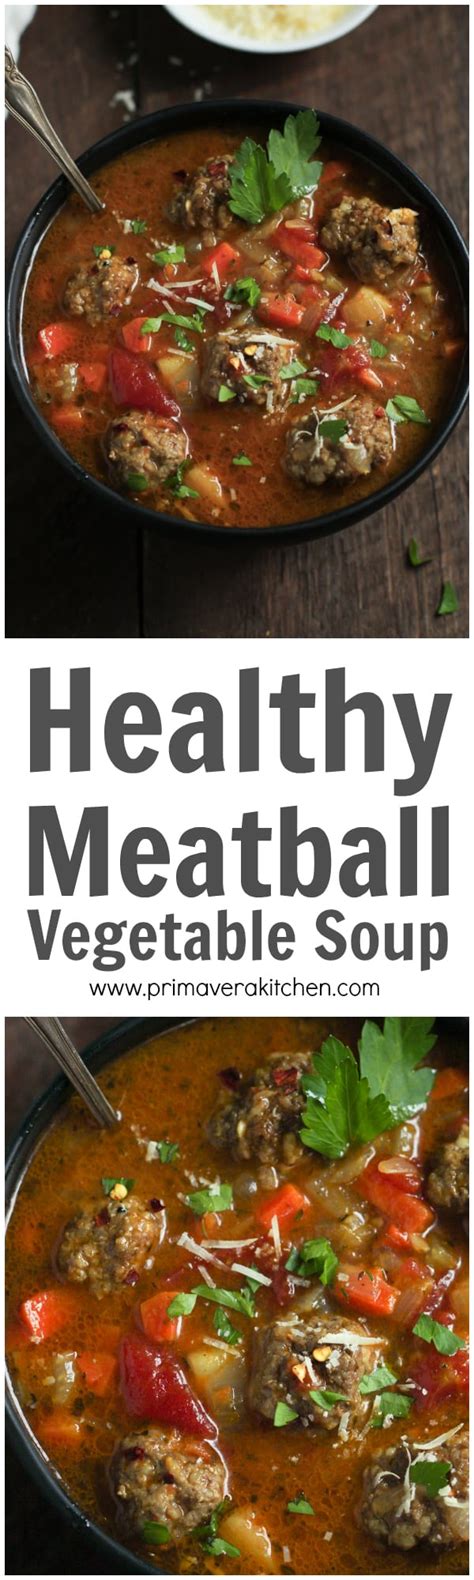 healthy-meatball-soup-healthy-easy-to-make image